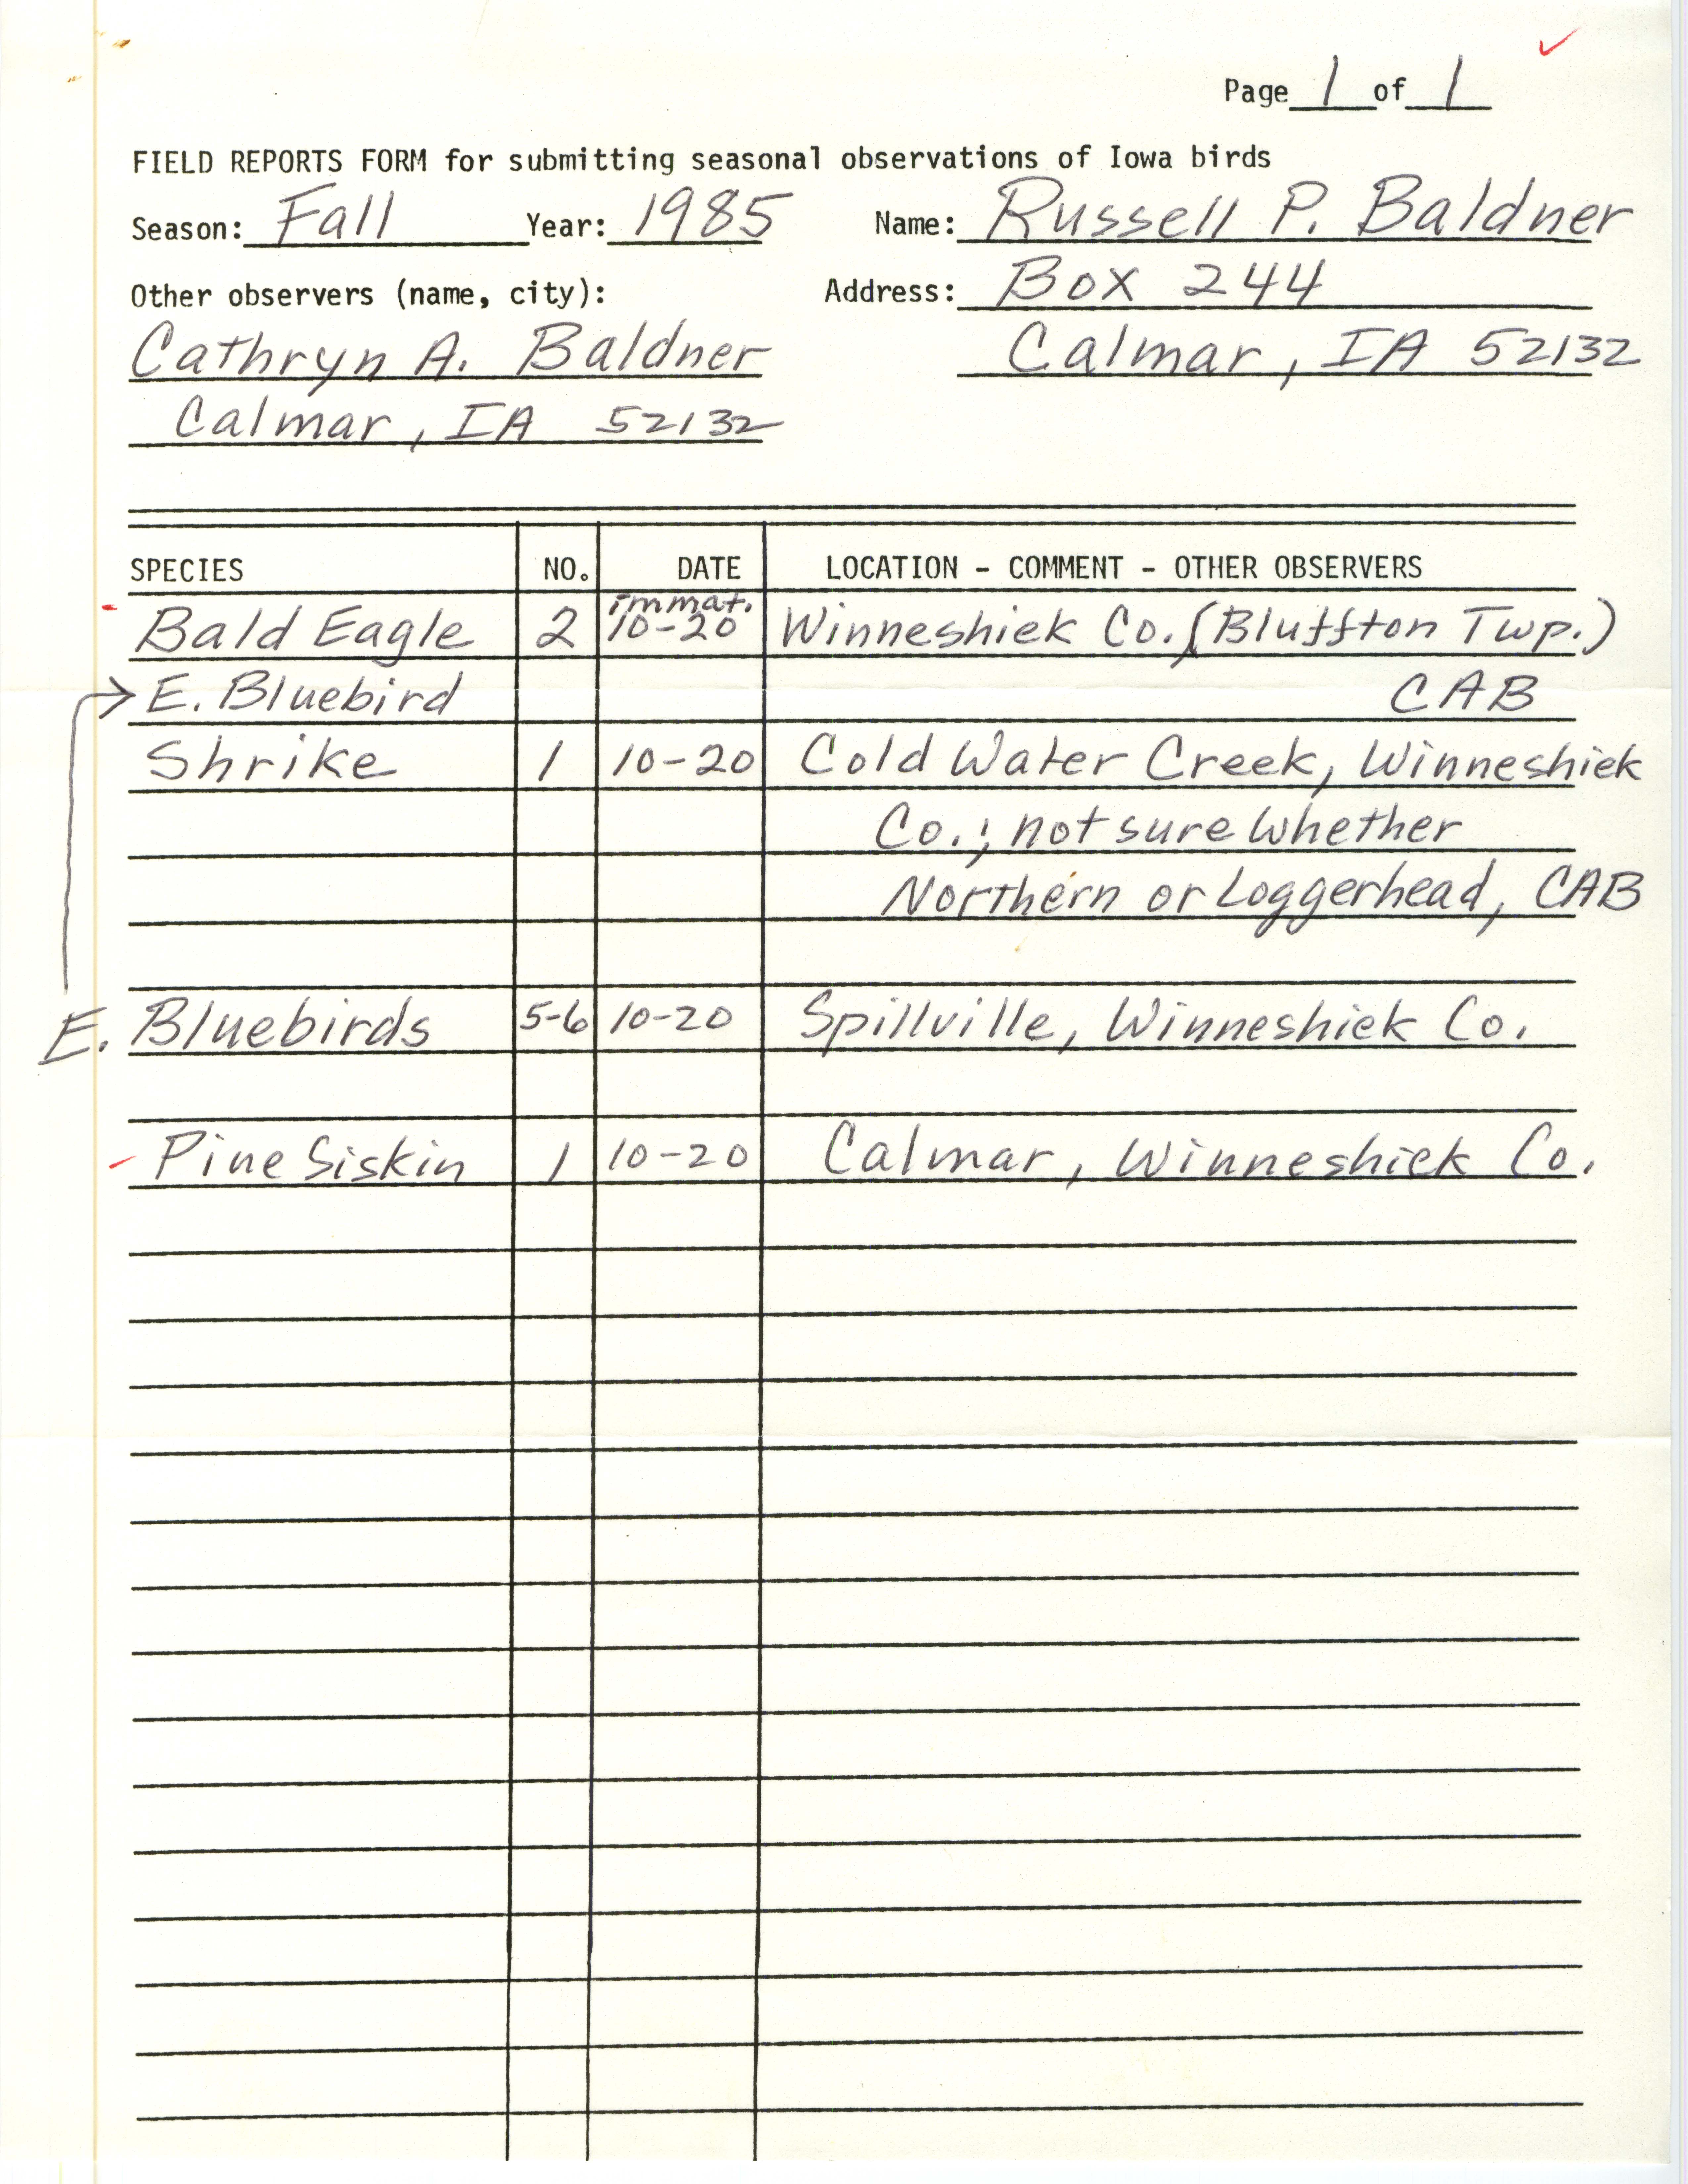 Field reports form submitted by Russell Baldner, Fall 1985